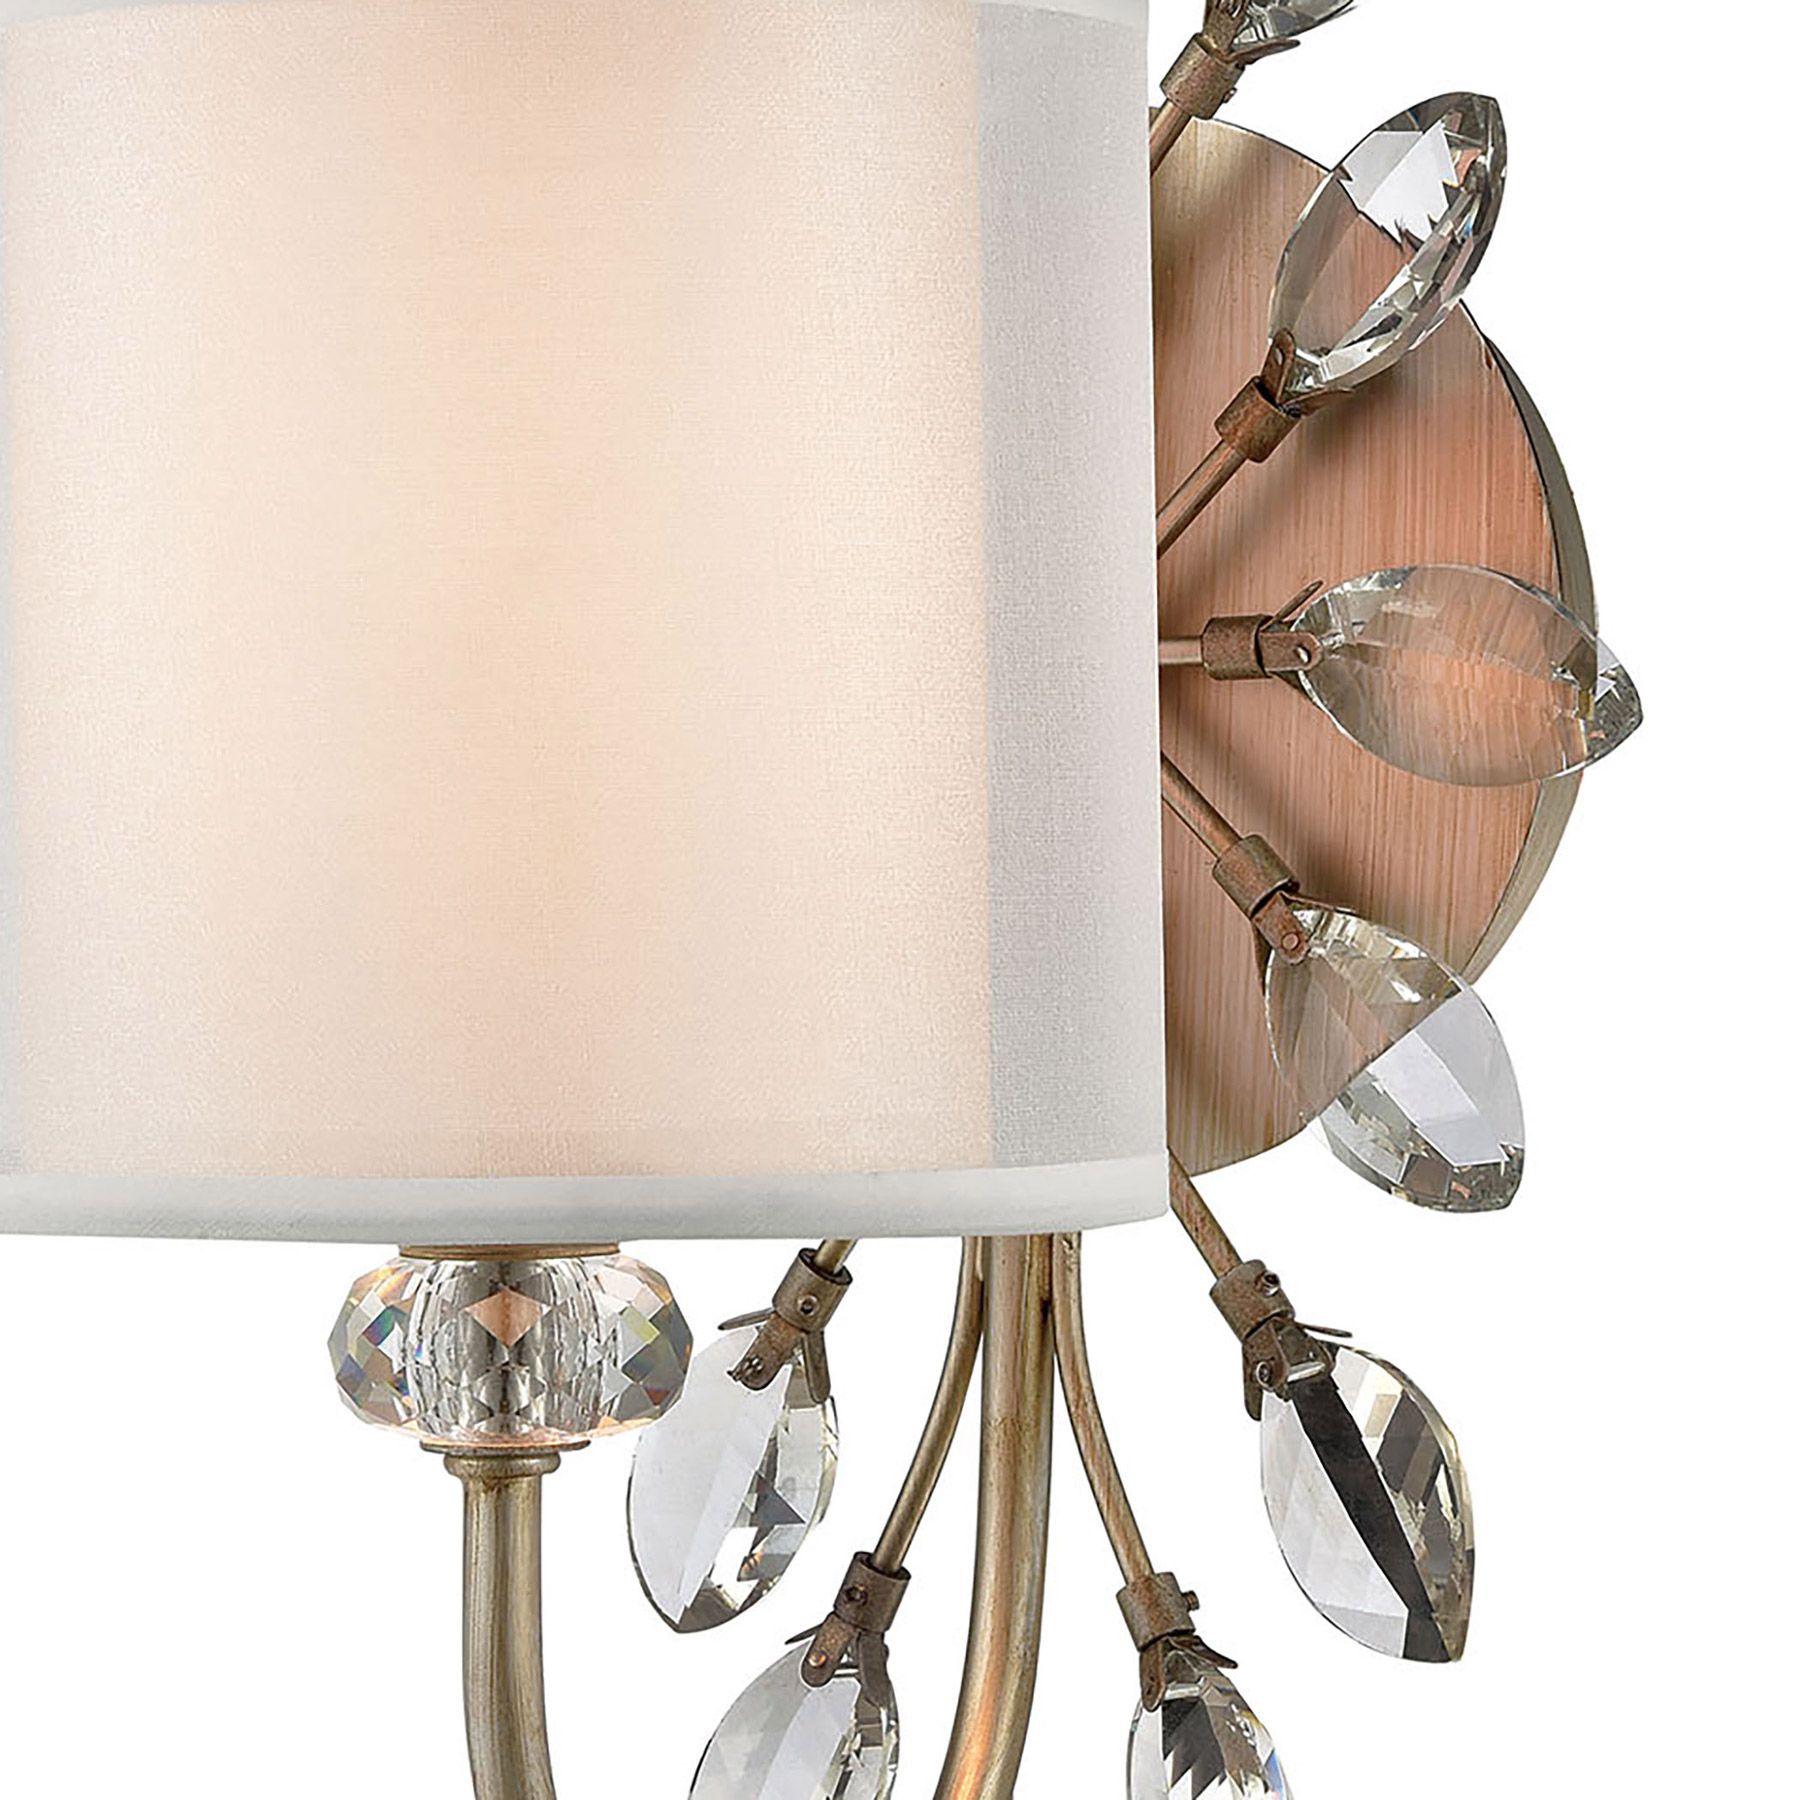 Elk Lighting 16276/1 1 Light Vanity Light In Aged Silver With White Regarding Aged Silver Vanity Mirrors (View 7 of 15)